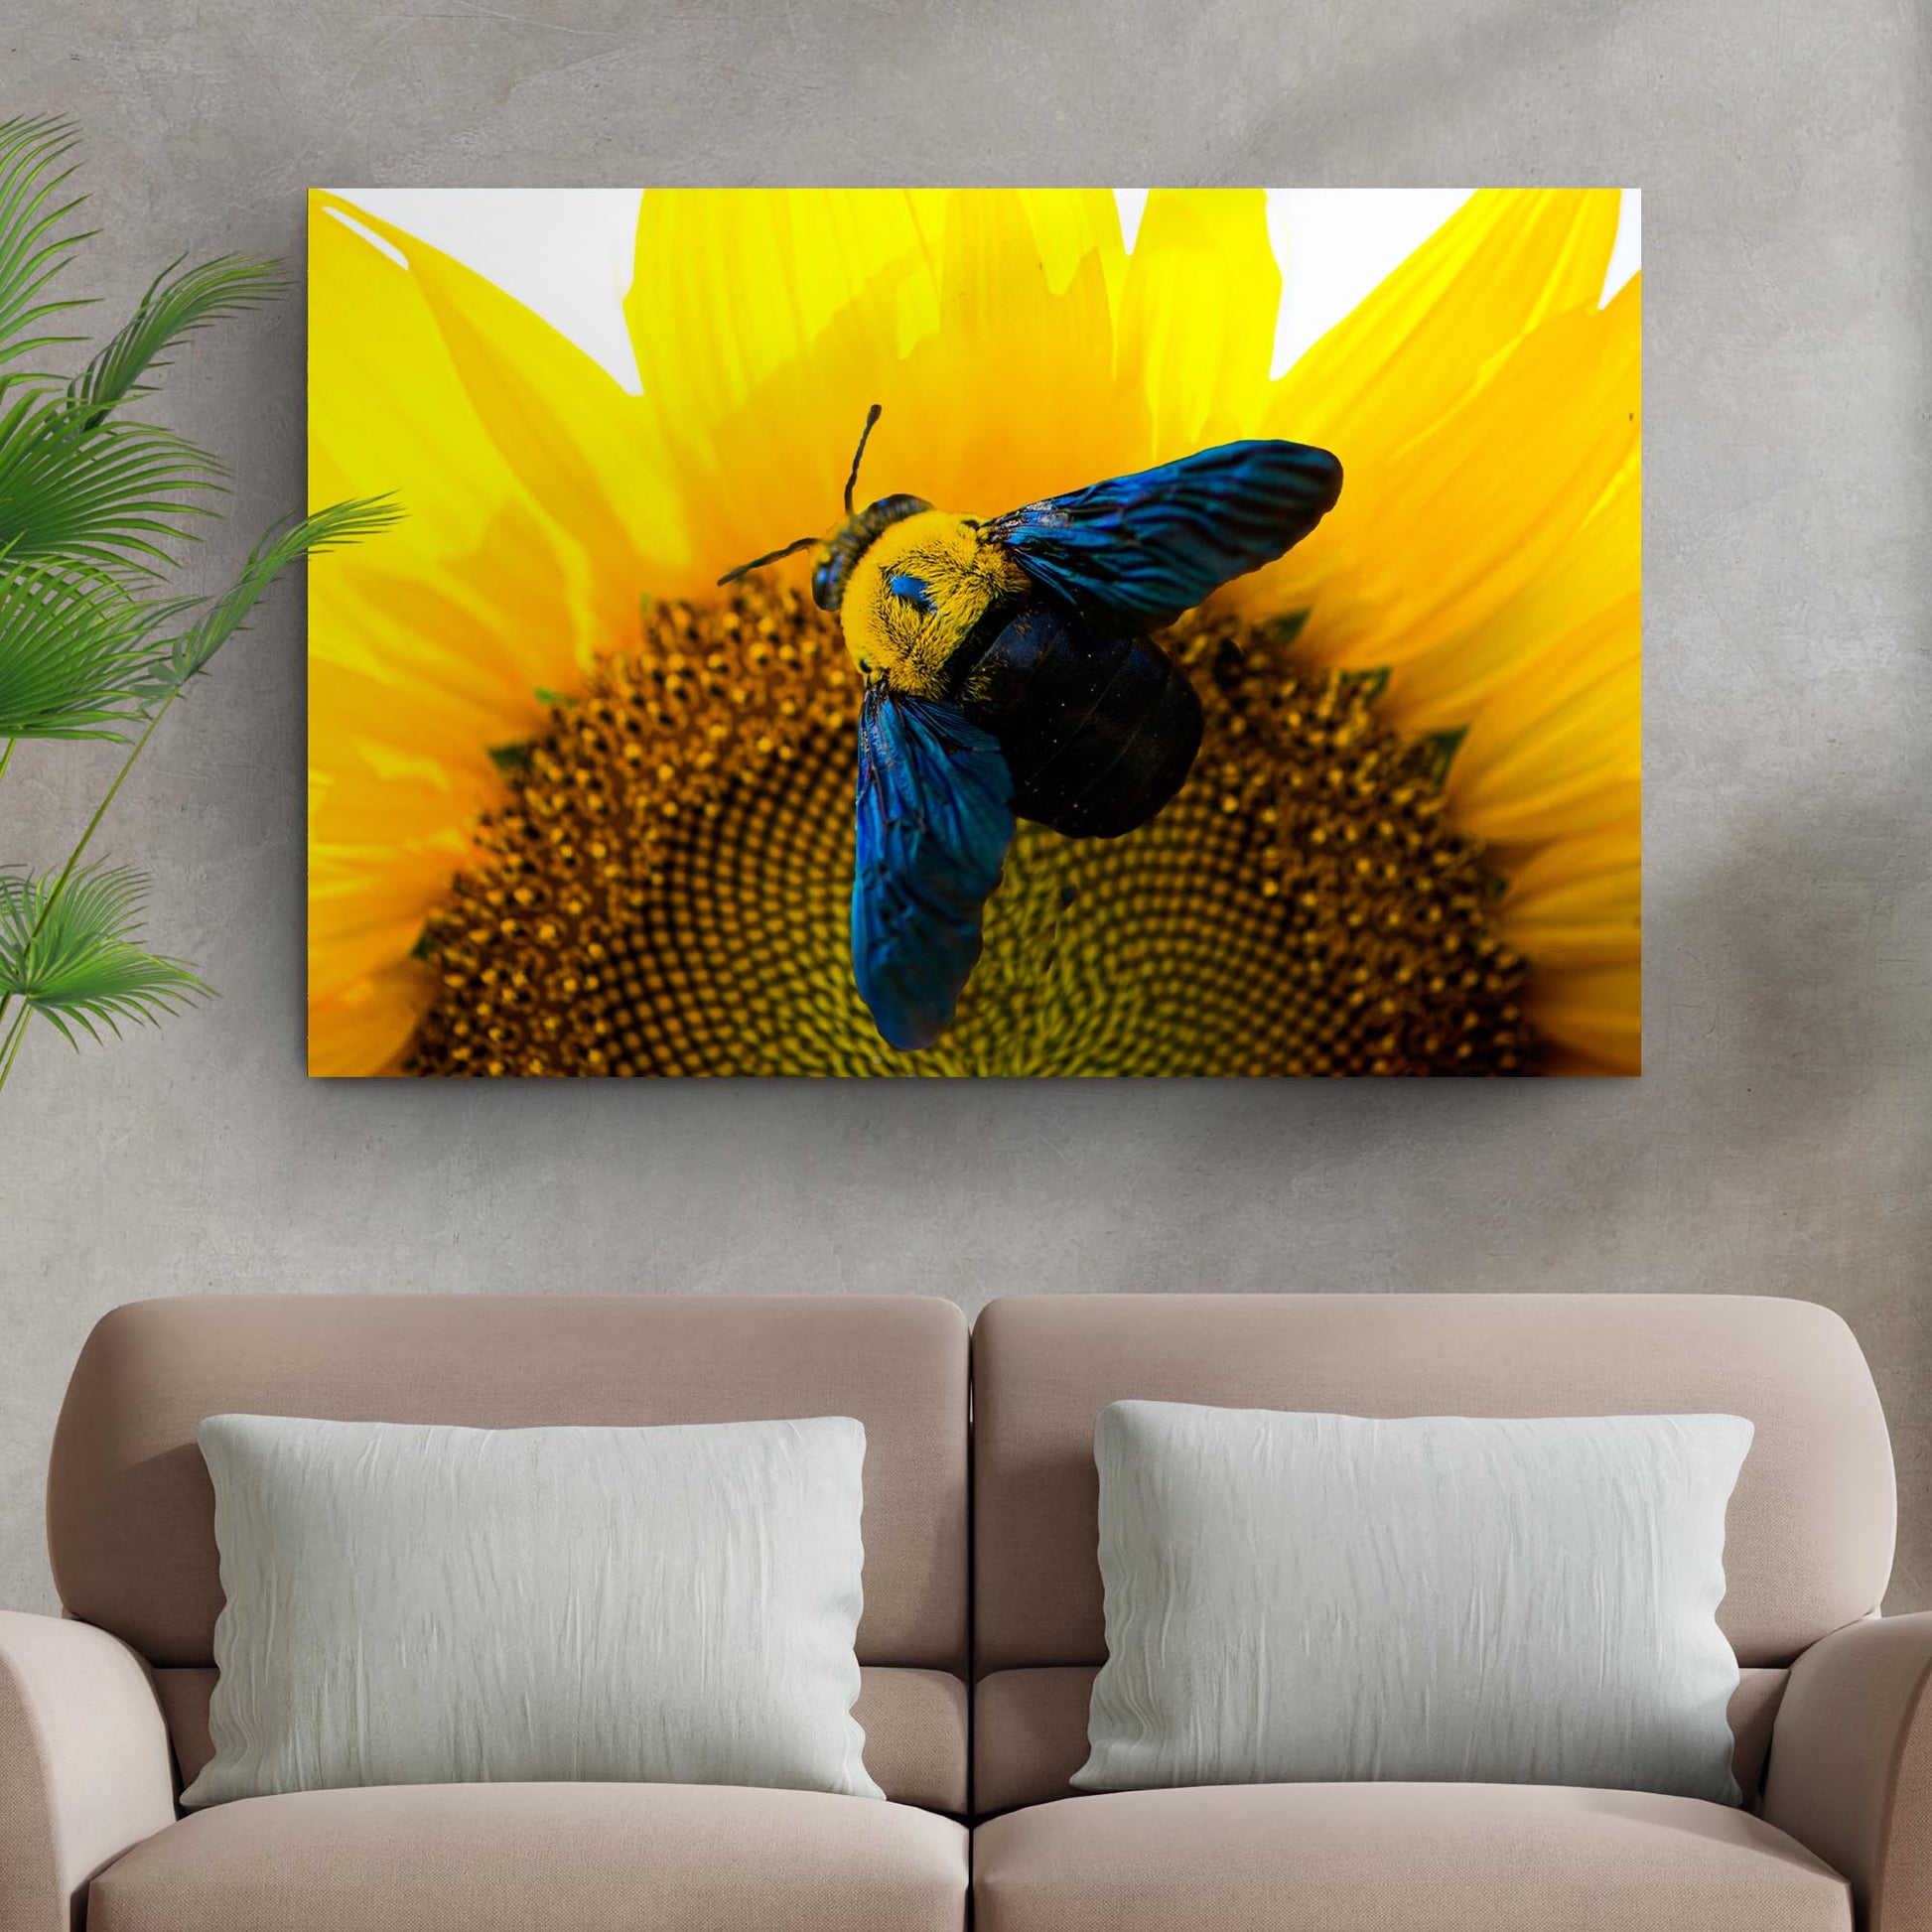 Bee Hoverfly Above A Sunflower Canvas Wall Art Style 2 - Image by Tailored Canvases